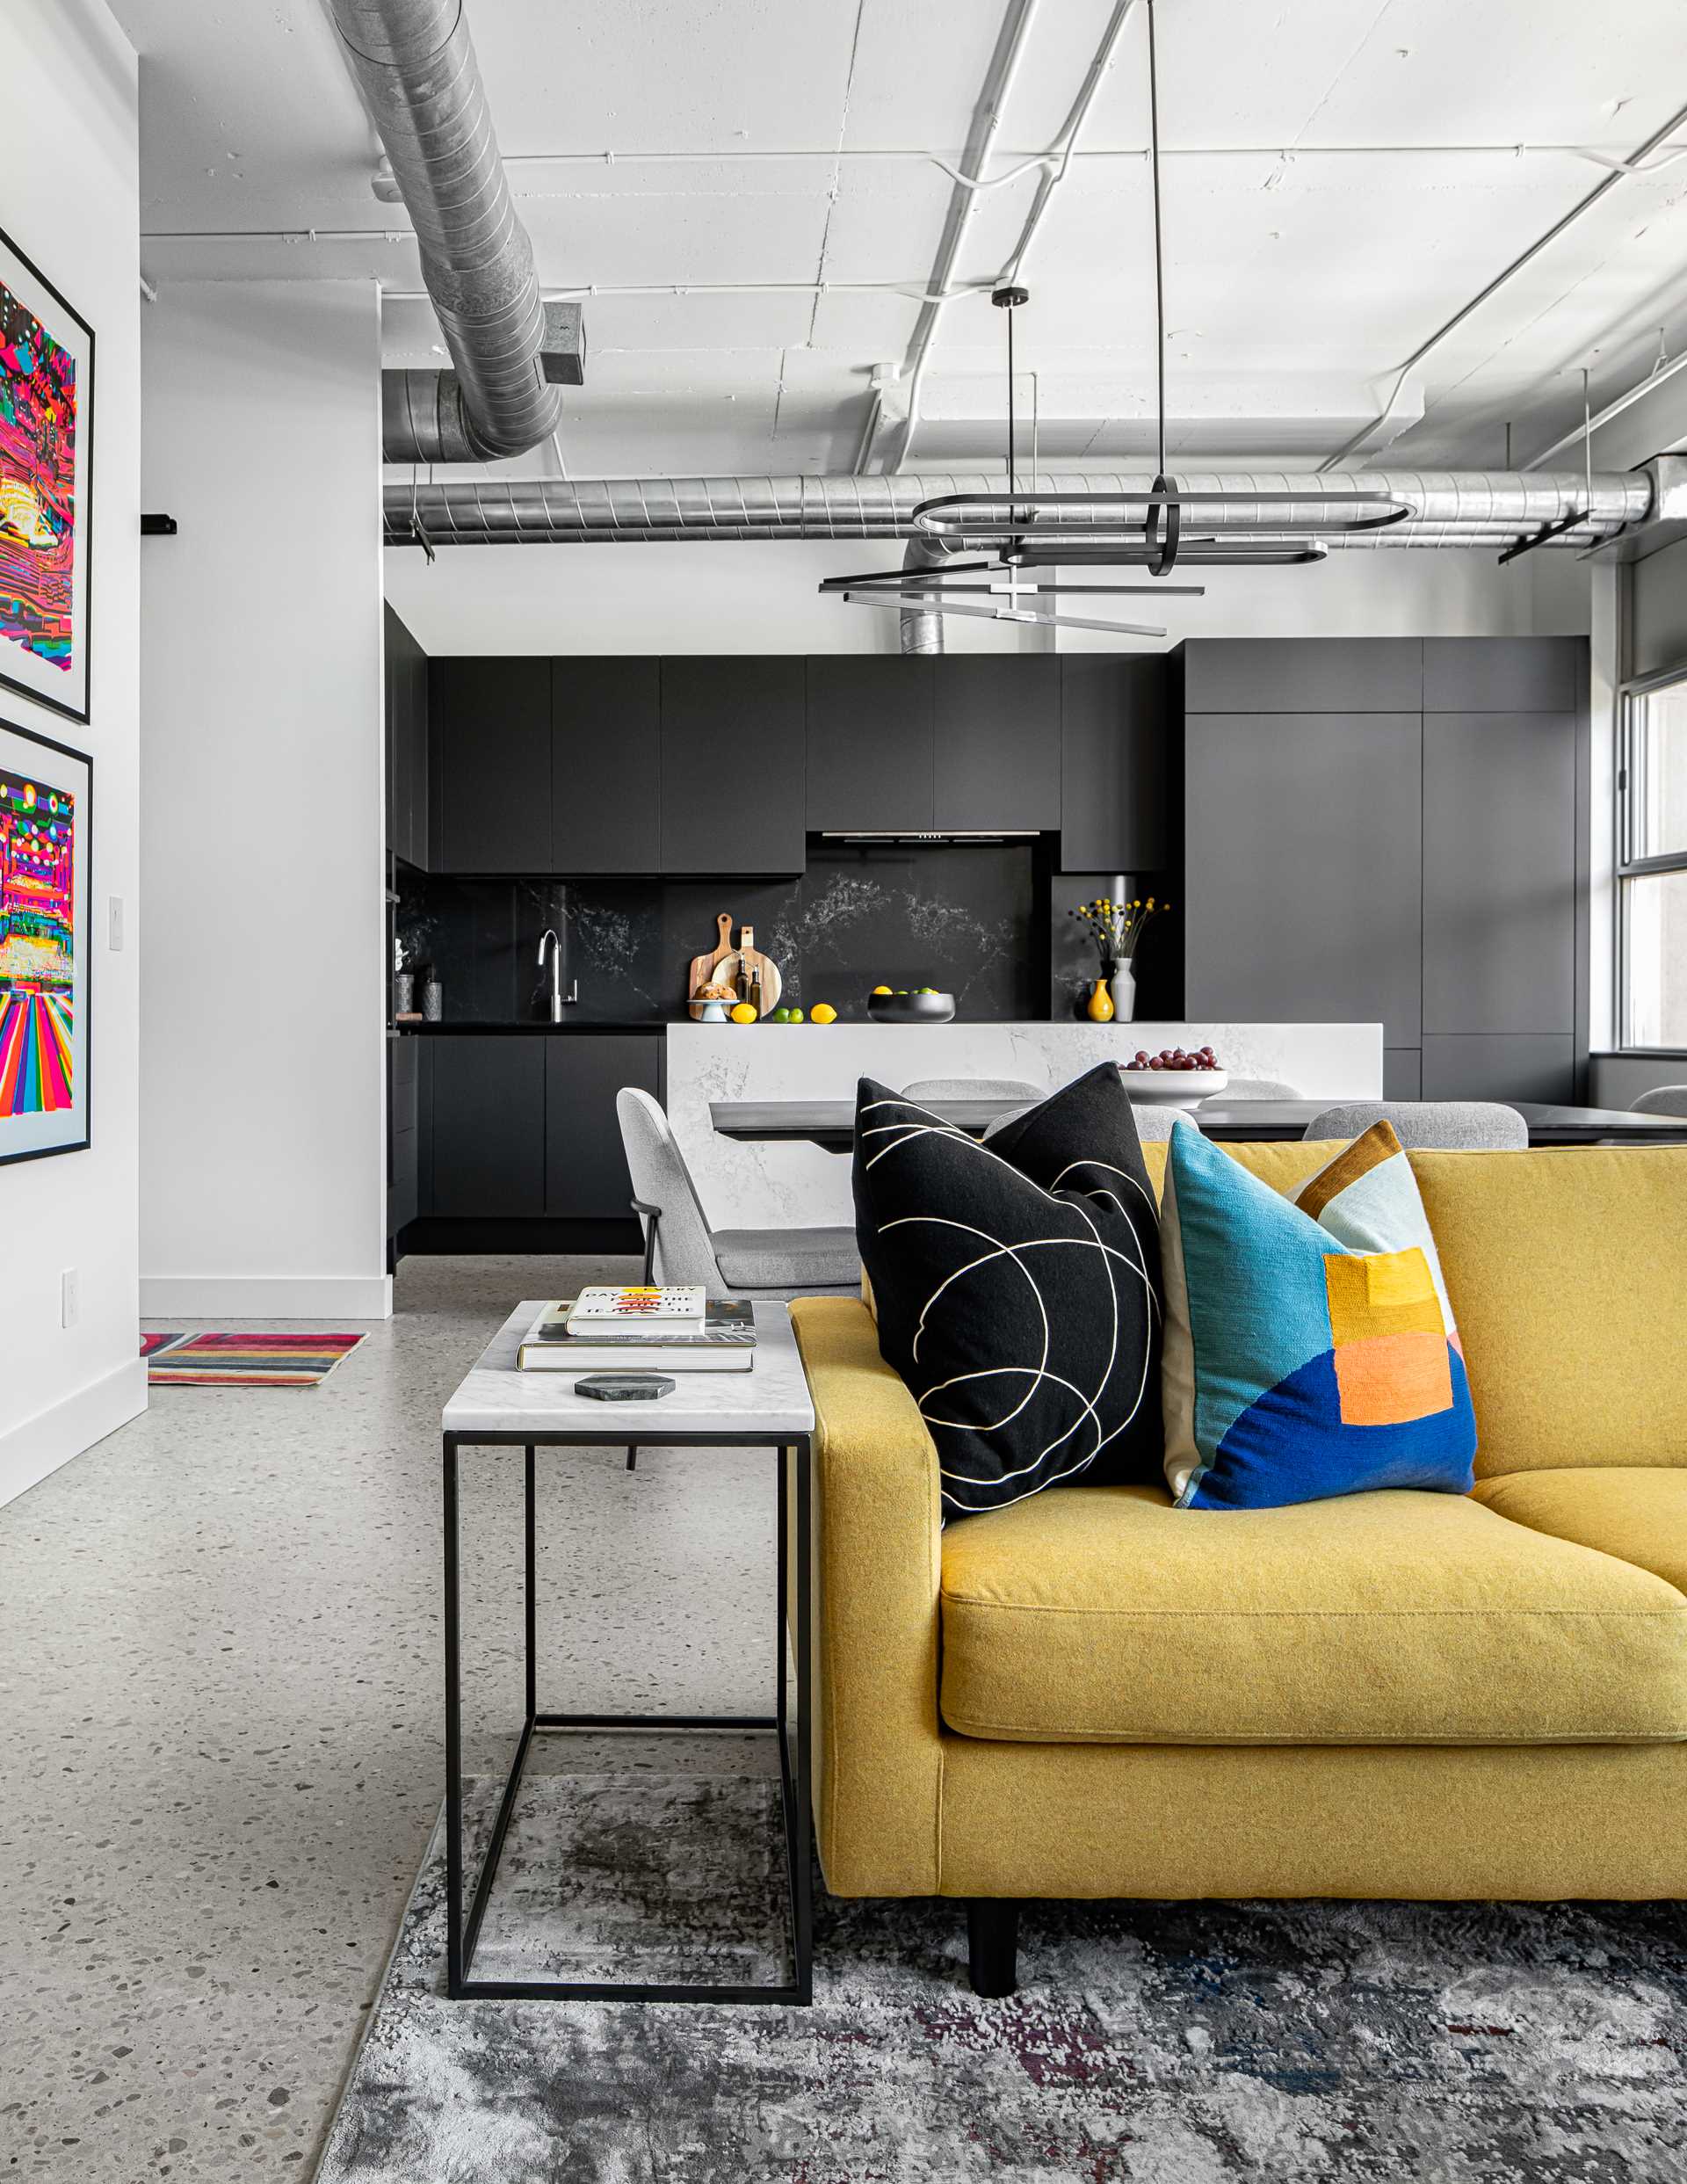 The living room in this modern loft apartment is home to a bright yellow sectional, as well as a large rug by Christoph Niemann.